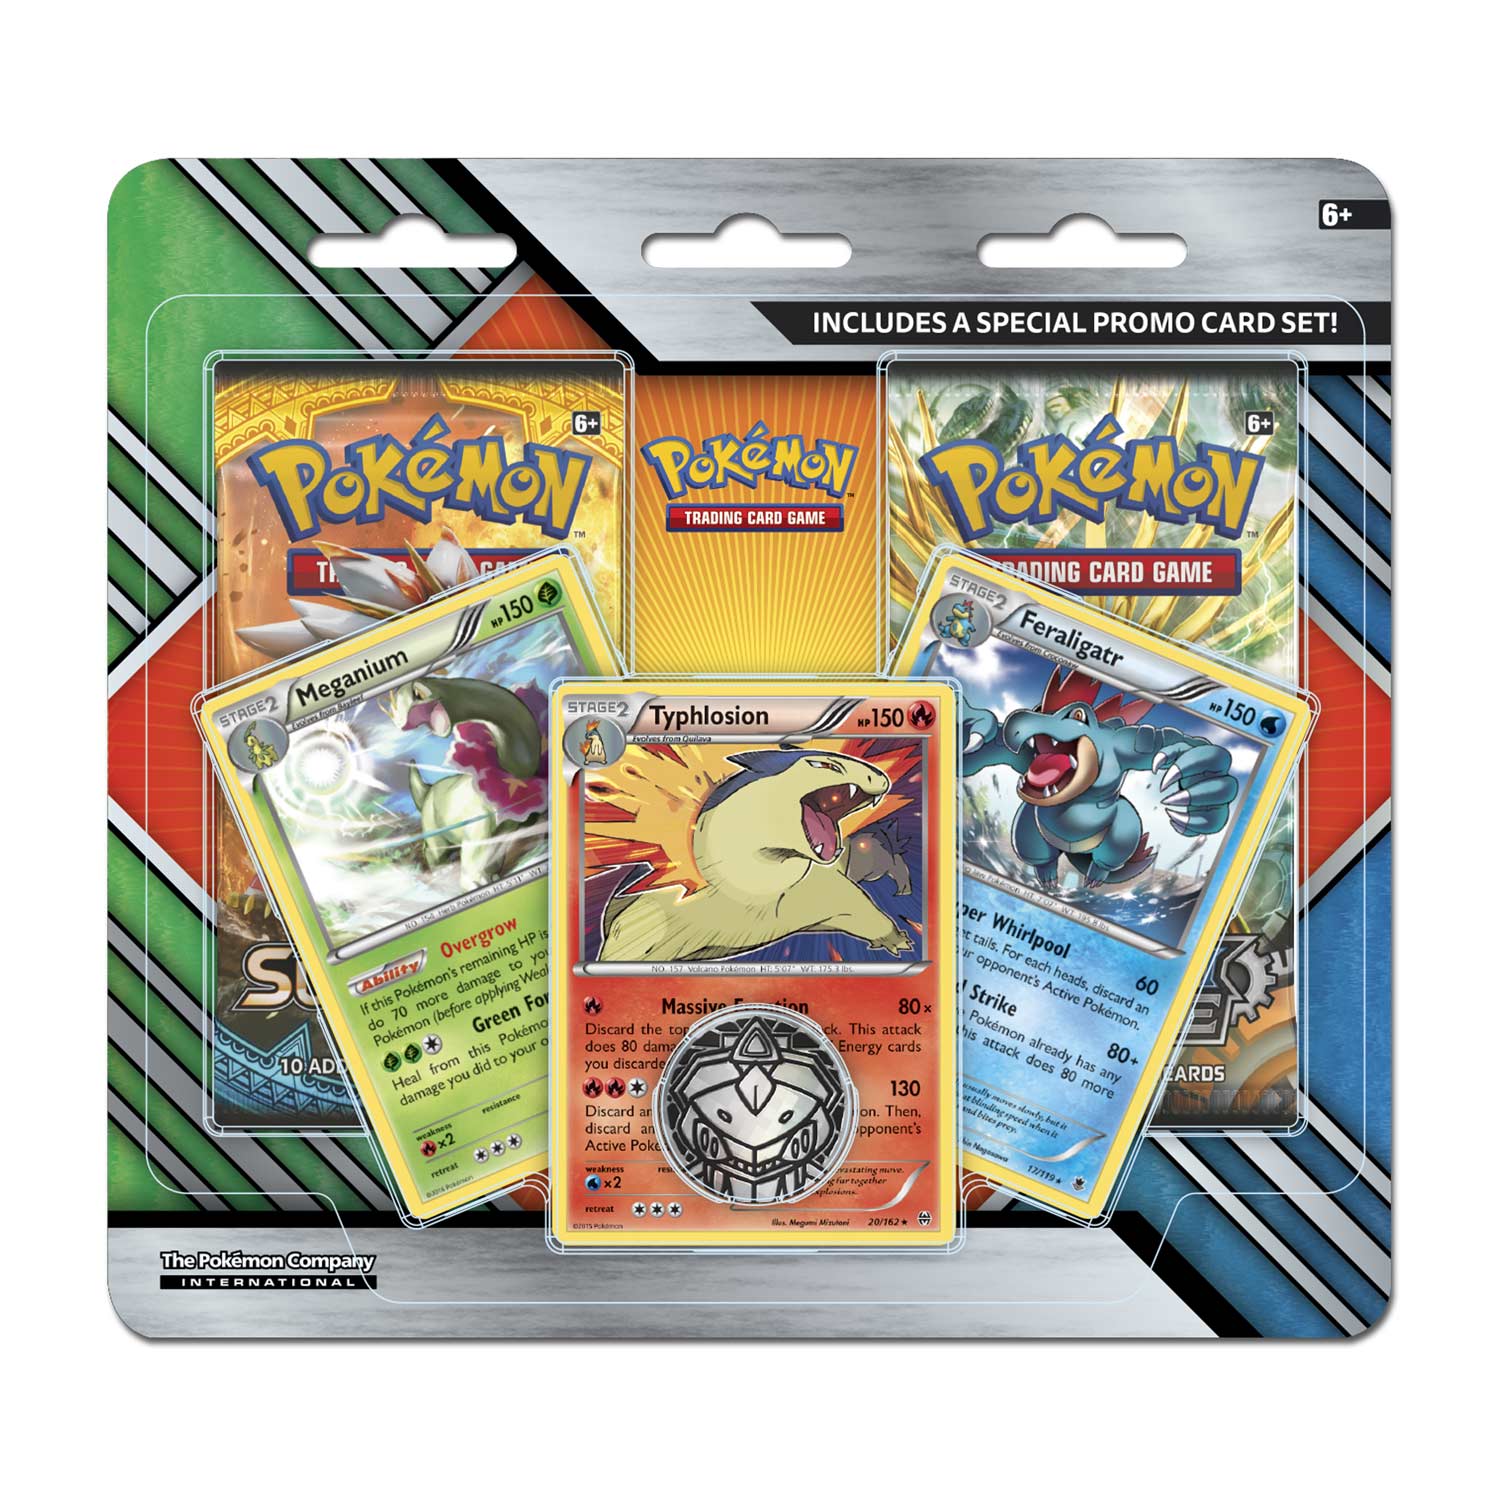 Pokémon Tcg Meganium Typhlosion And Feraligatr With 2 Booster Packs And Coin